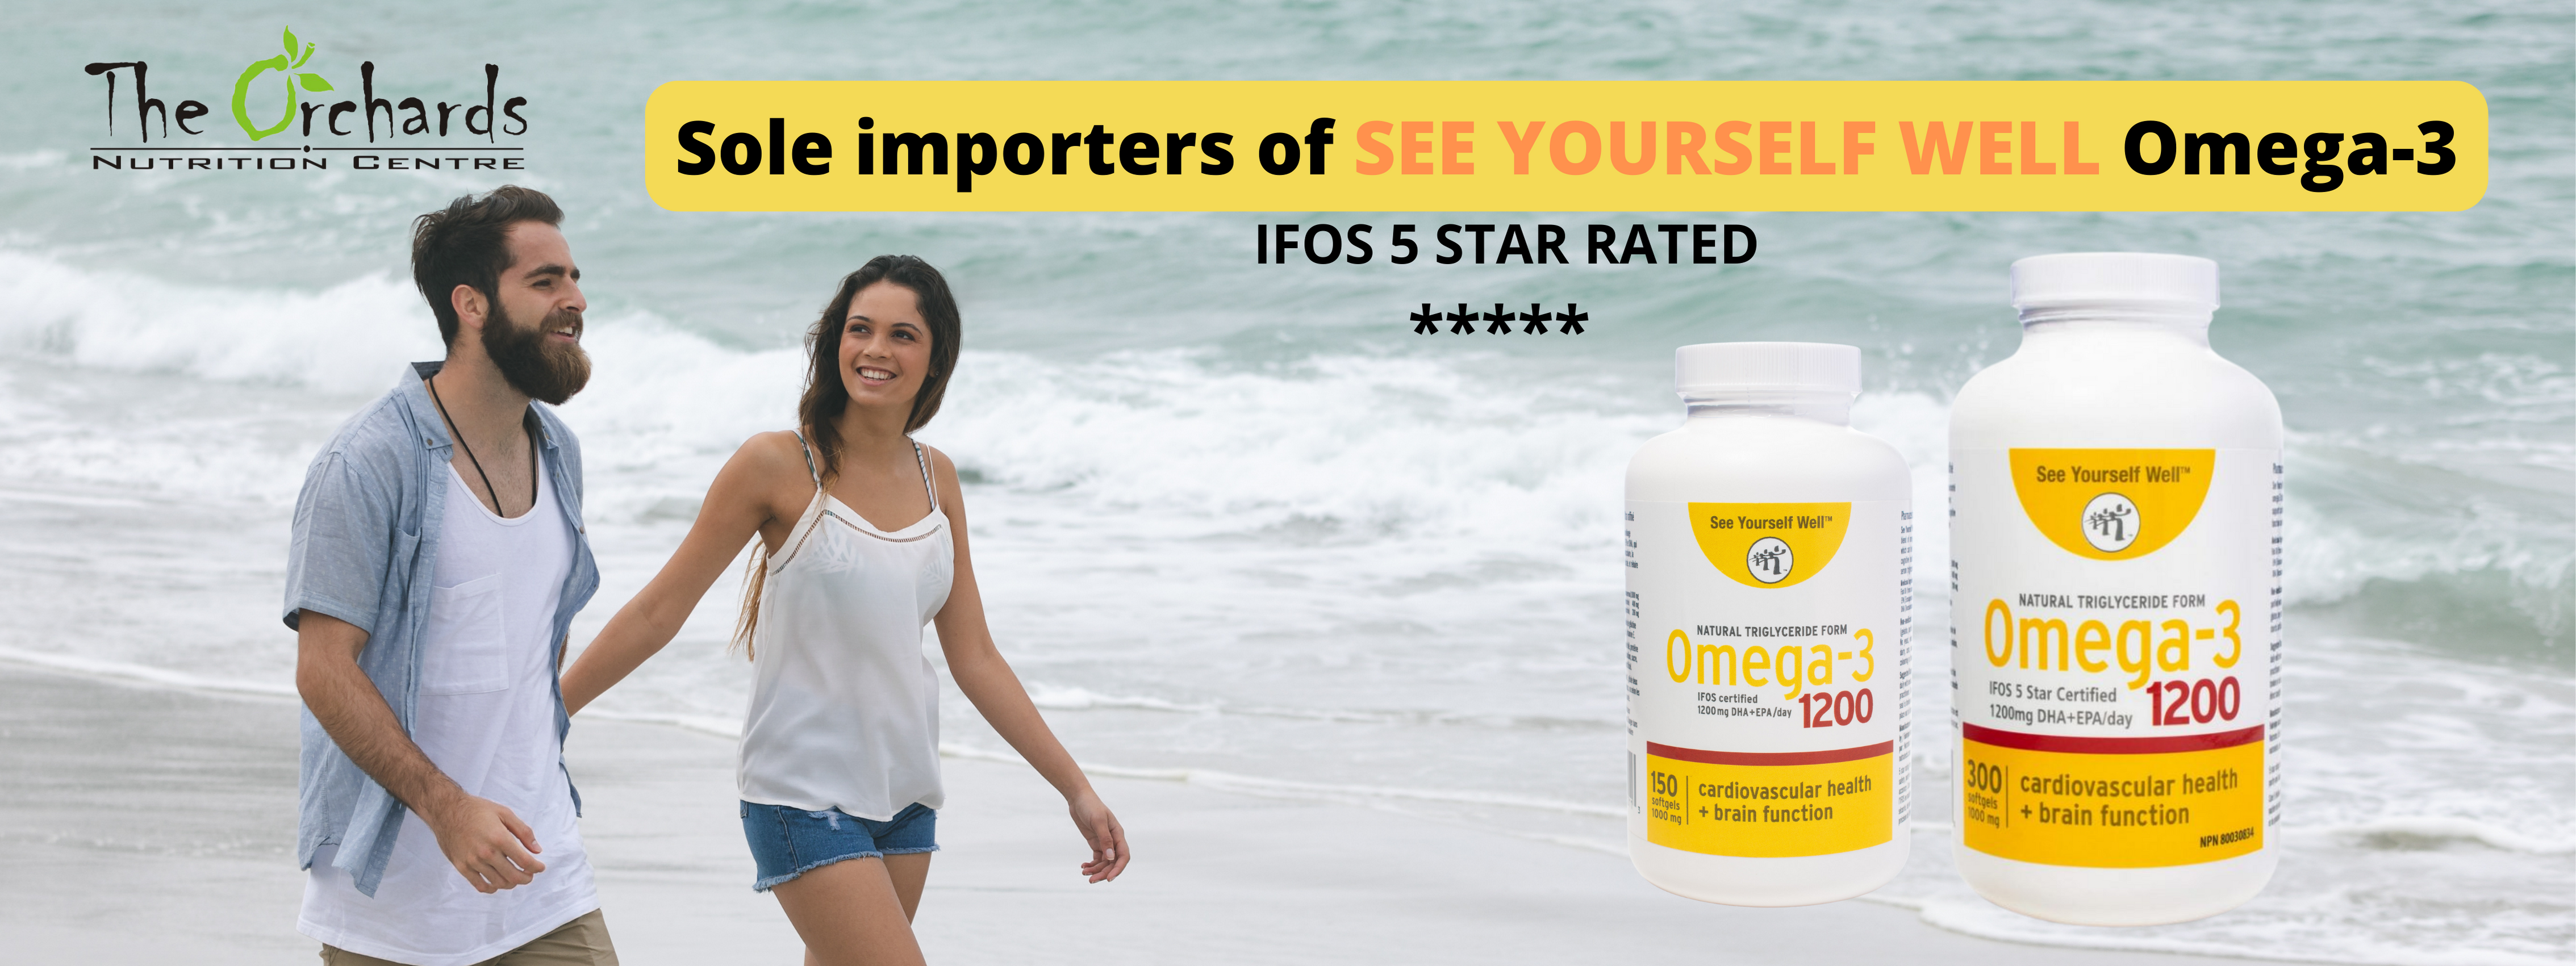 See Yourself Well Omega 3